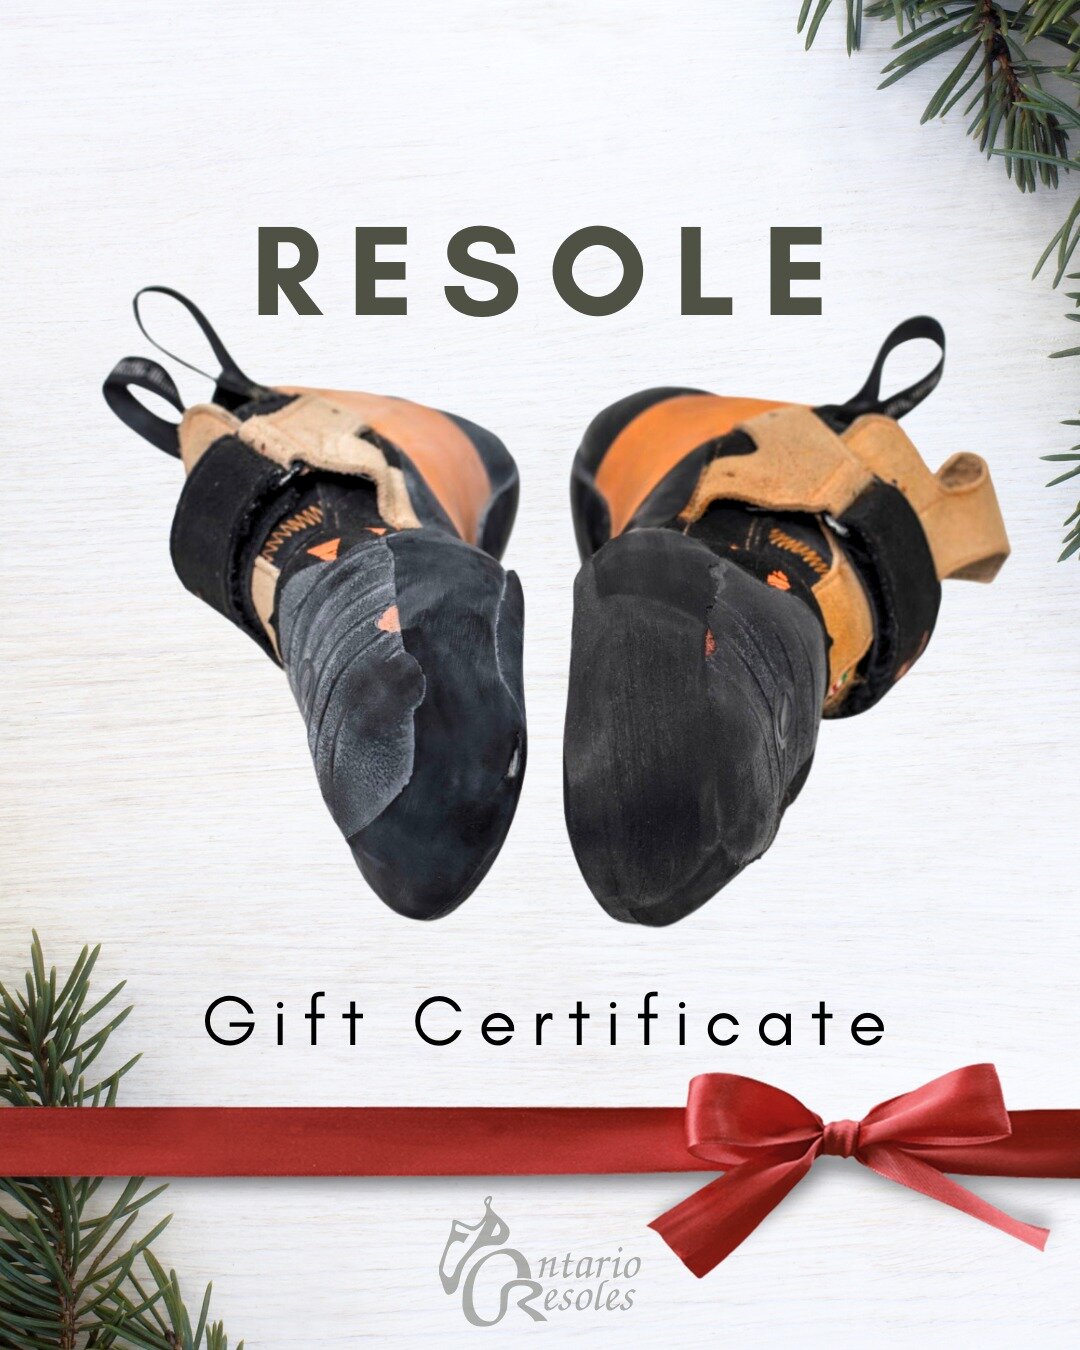 Do your climbing buddy's shoes look like they just broke the speed record on the nose? It's been a long season, give those hardworking shoes a little TLC with our Resole Gift Certificates. Our skilled team is ready to restore those crispy edges while